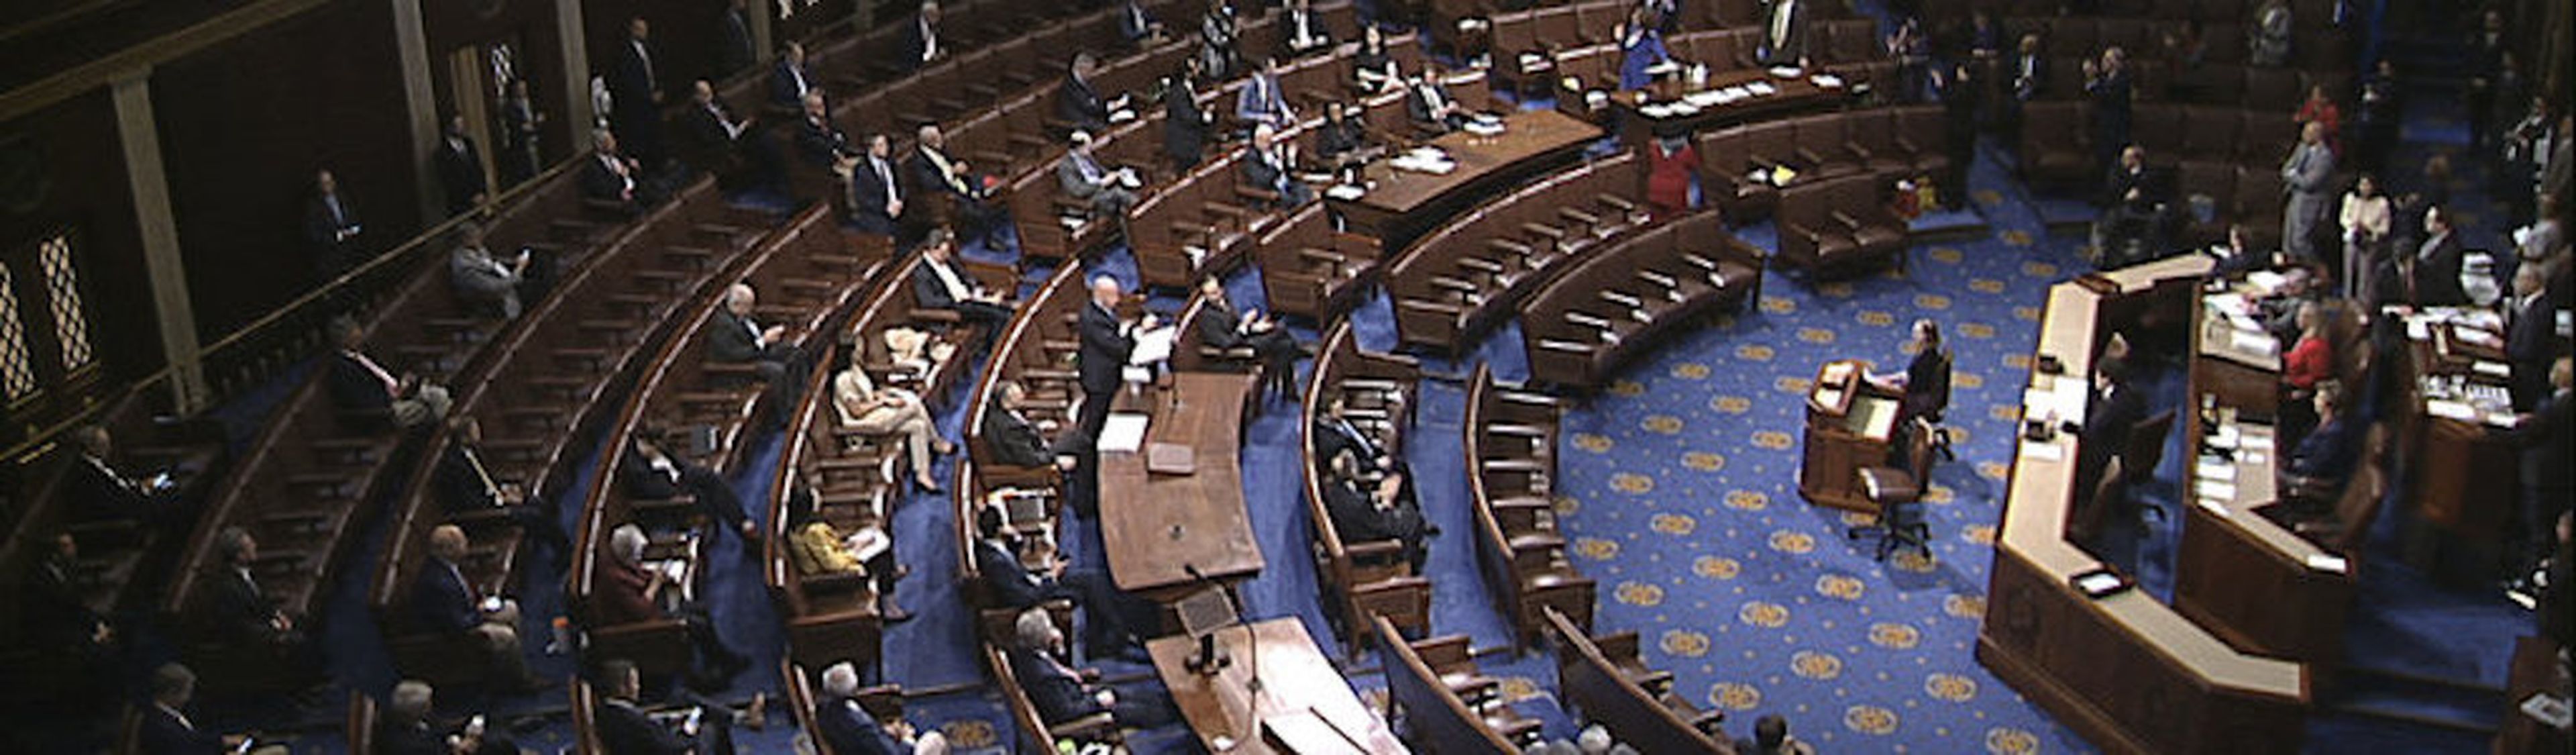 Lawmakers are directed to practice social distancing for debates and votes on the floor of the House of Representatives.